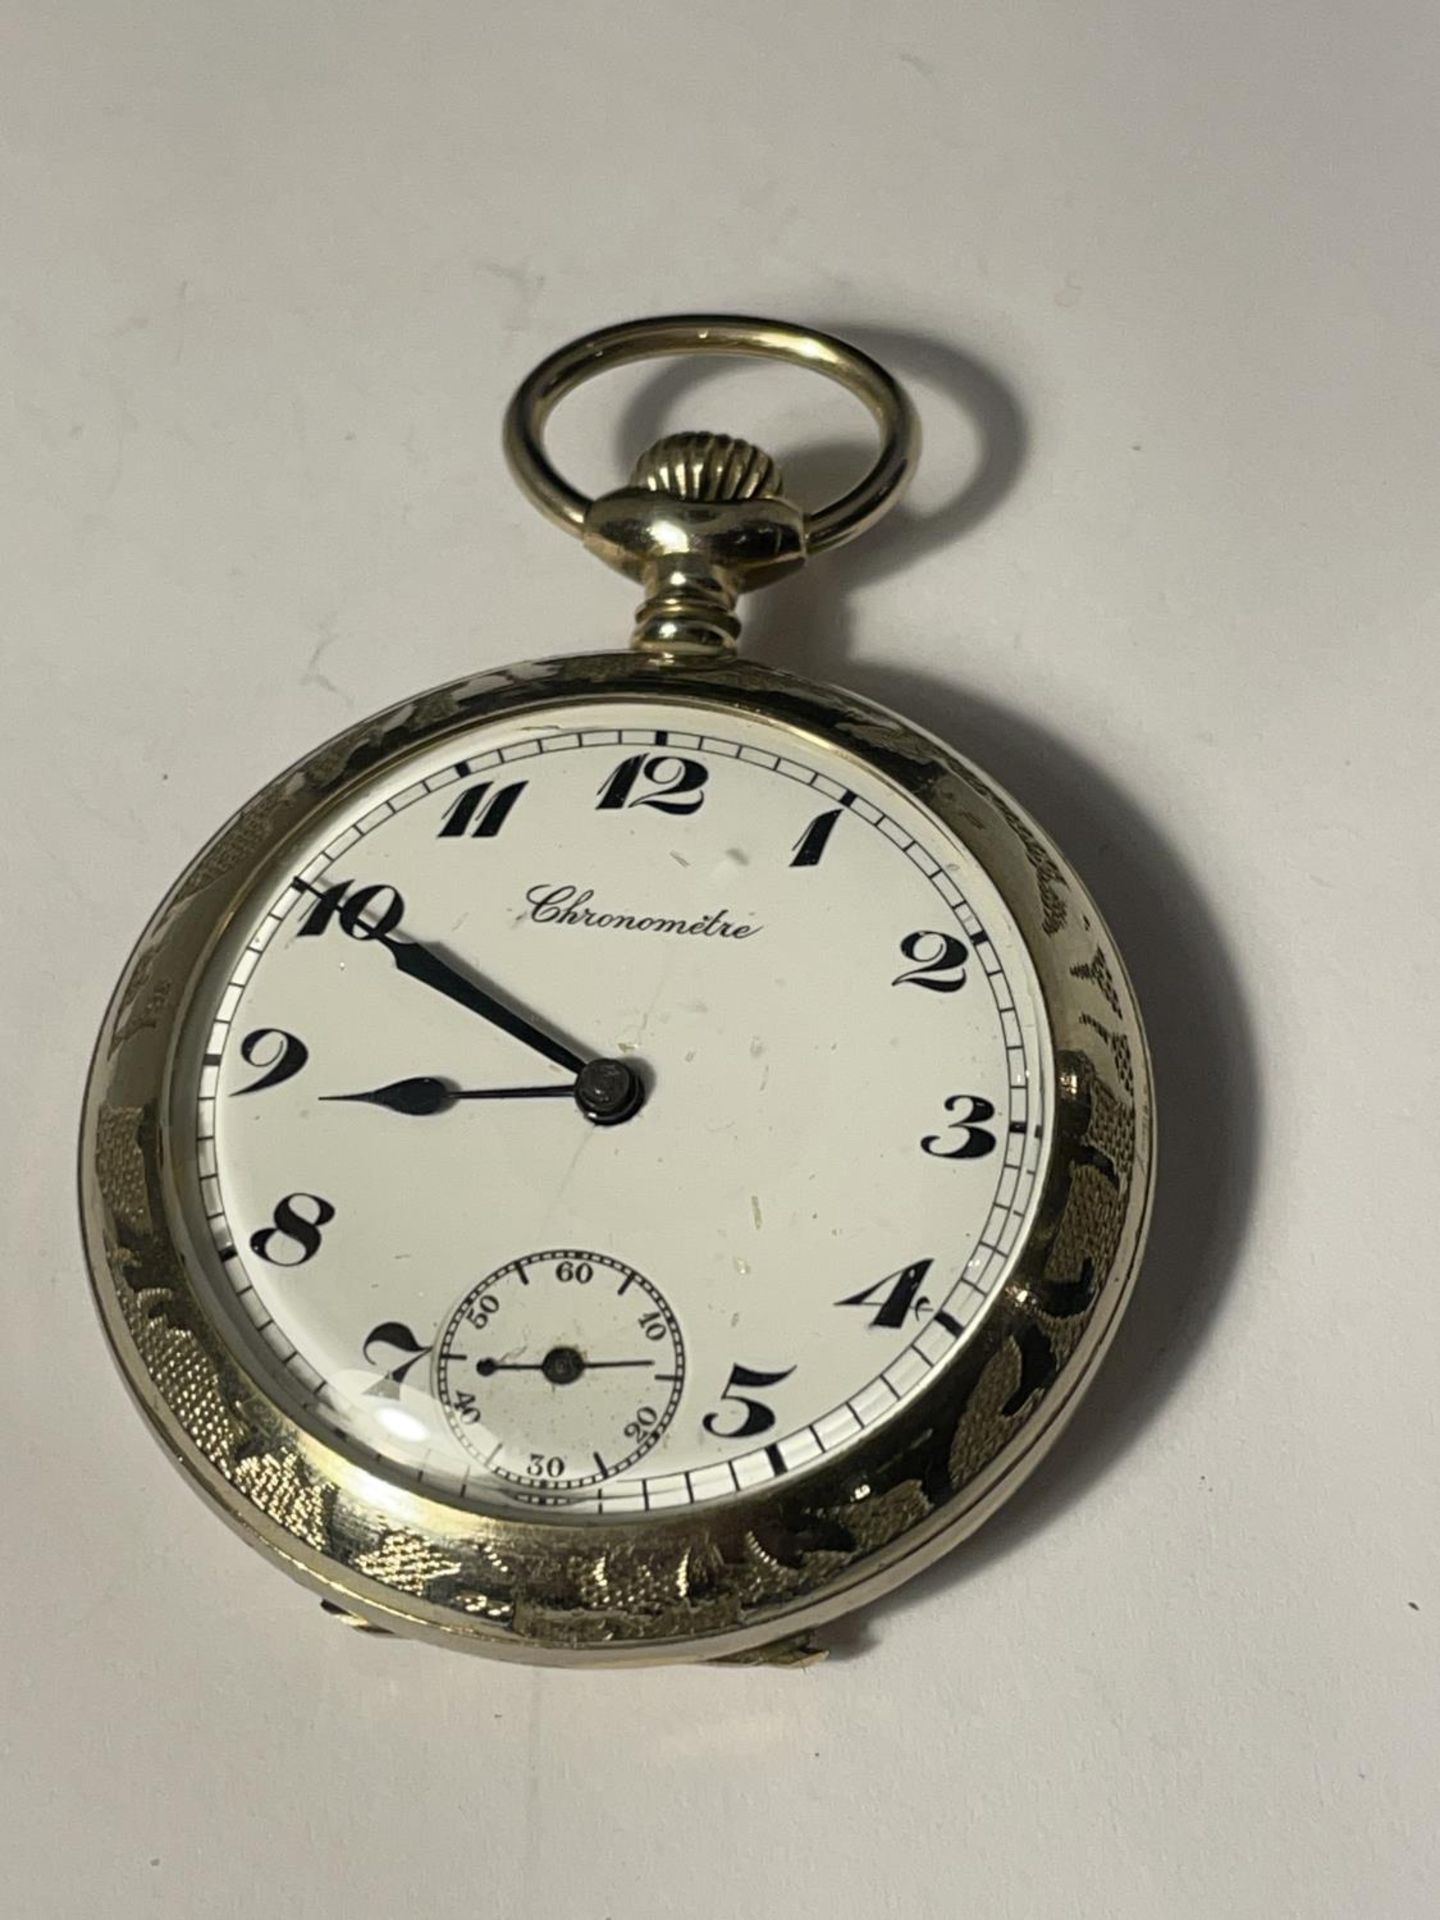 A GOLD PLATED CHRONOGRAPH POCKET WATCH SEEN WORKING BUT NO WARRANTY